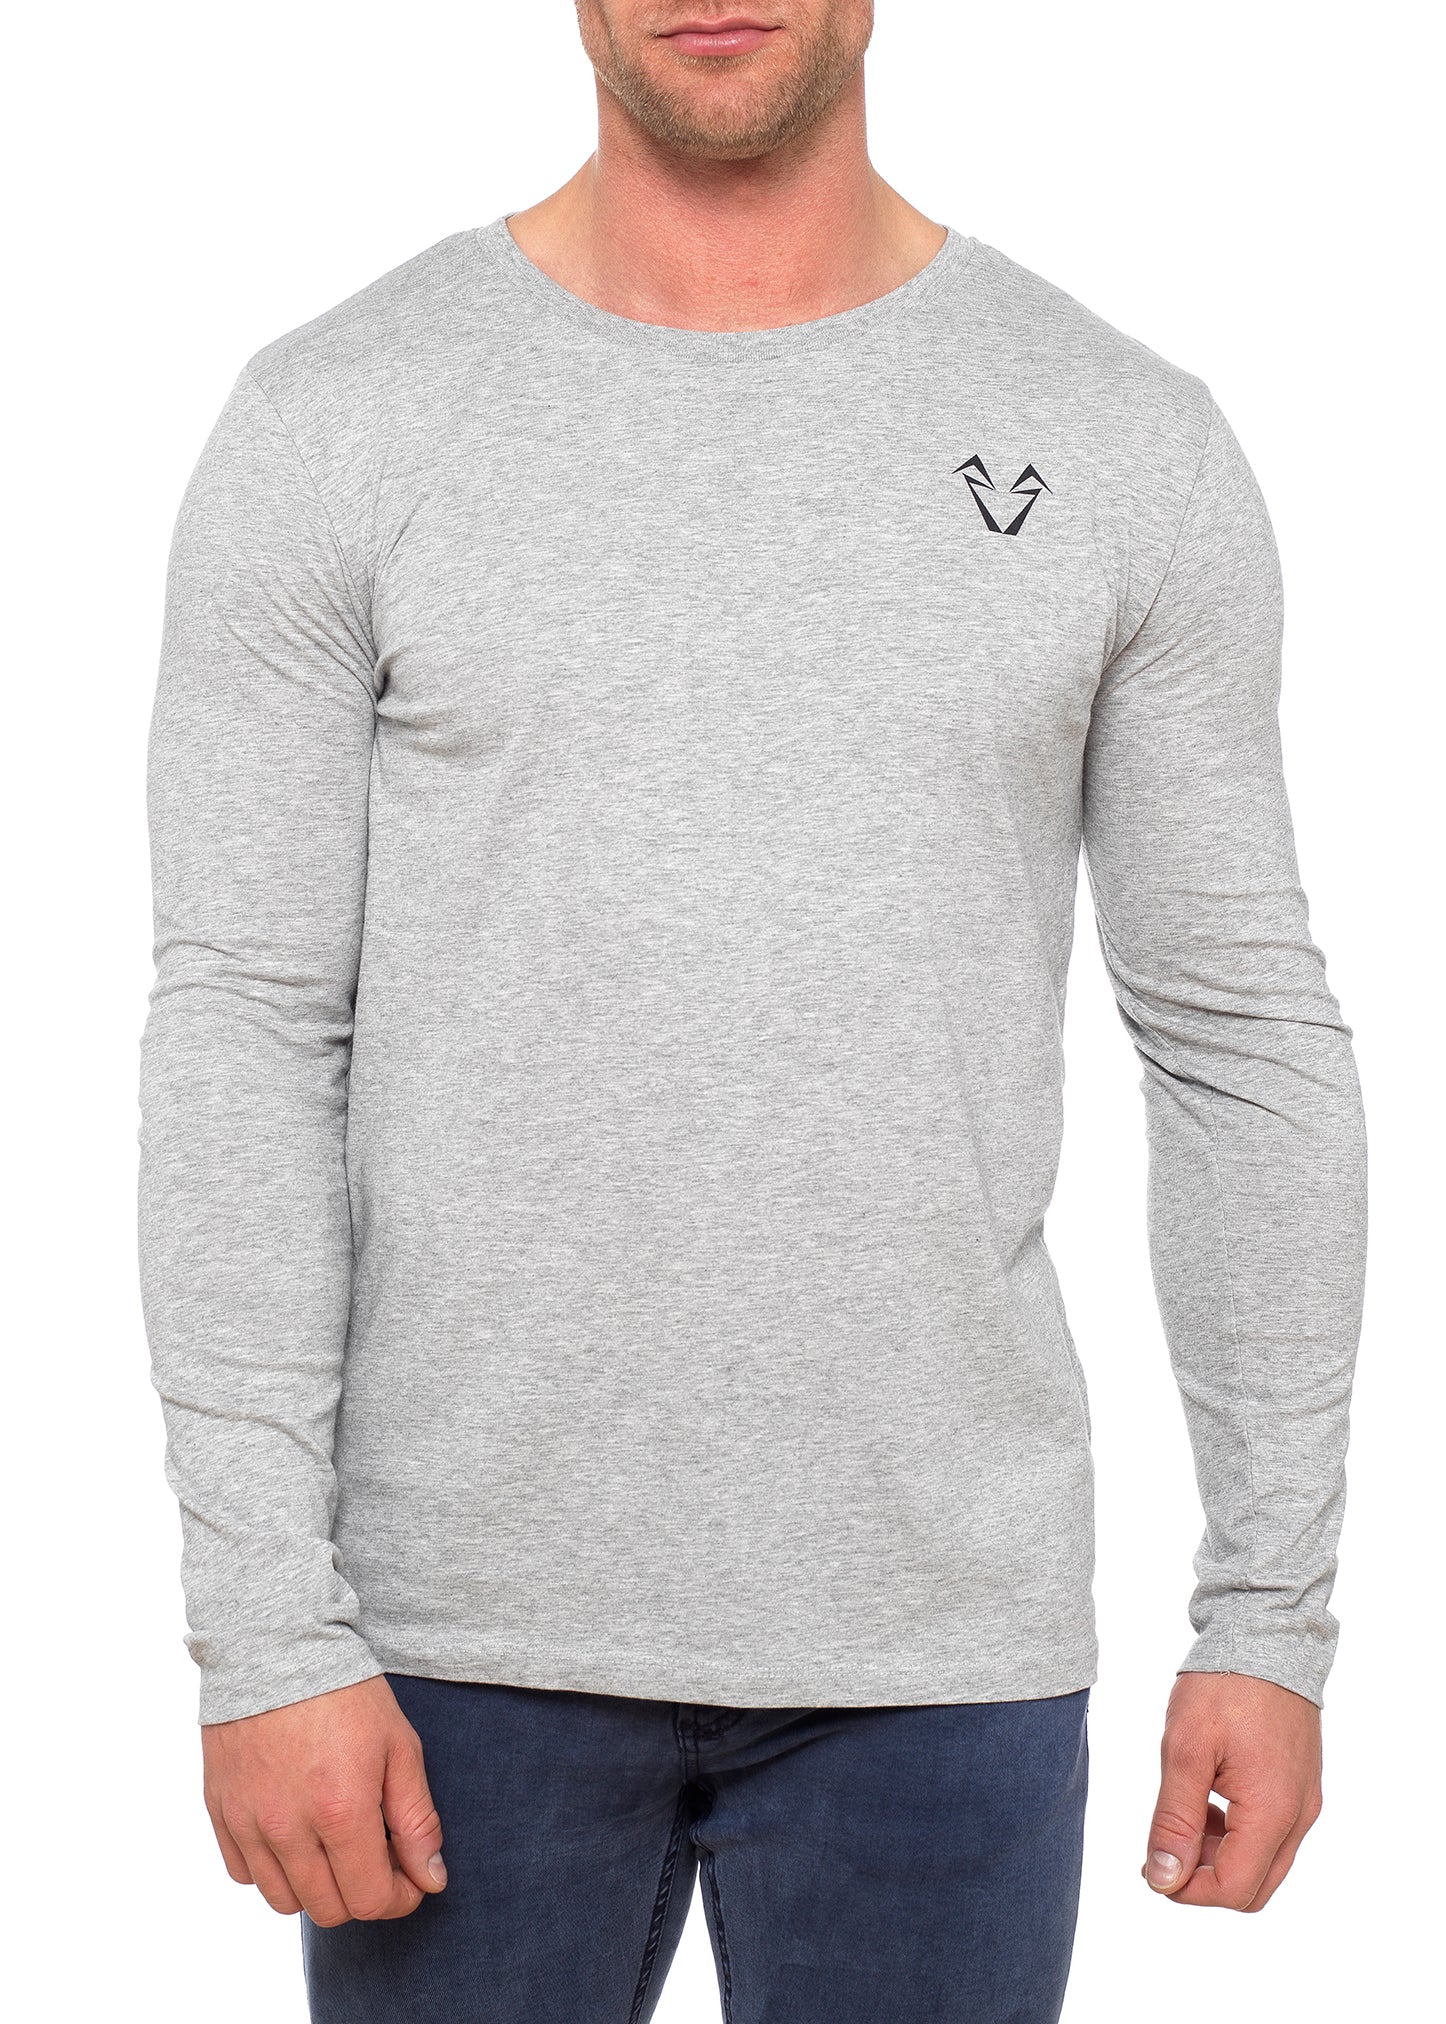 Mens Muscle Fit Heather Grey Long Sleeve T Shirts